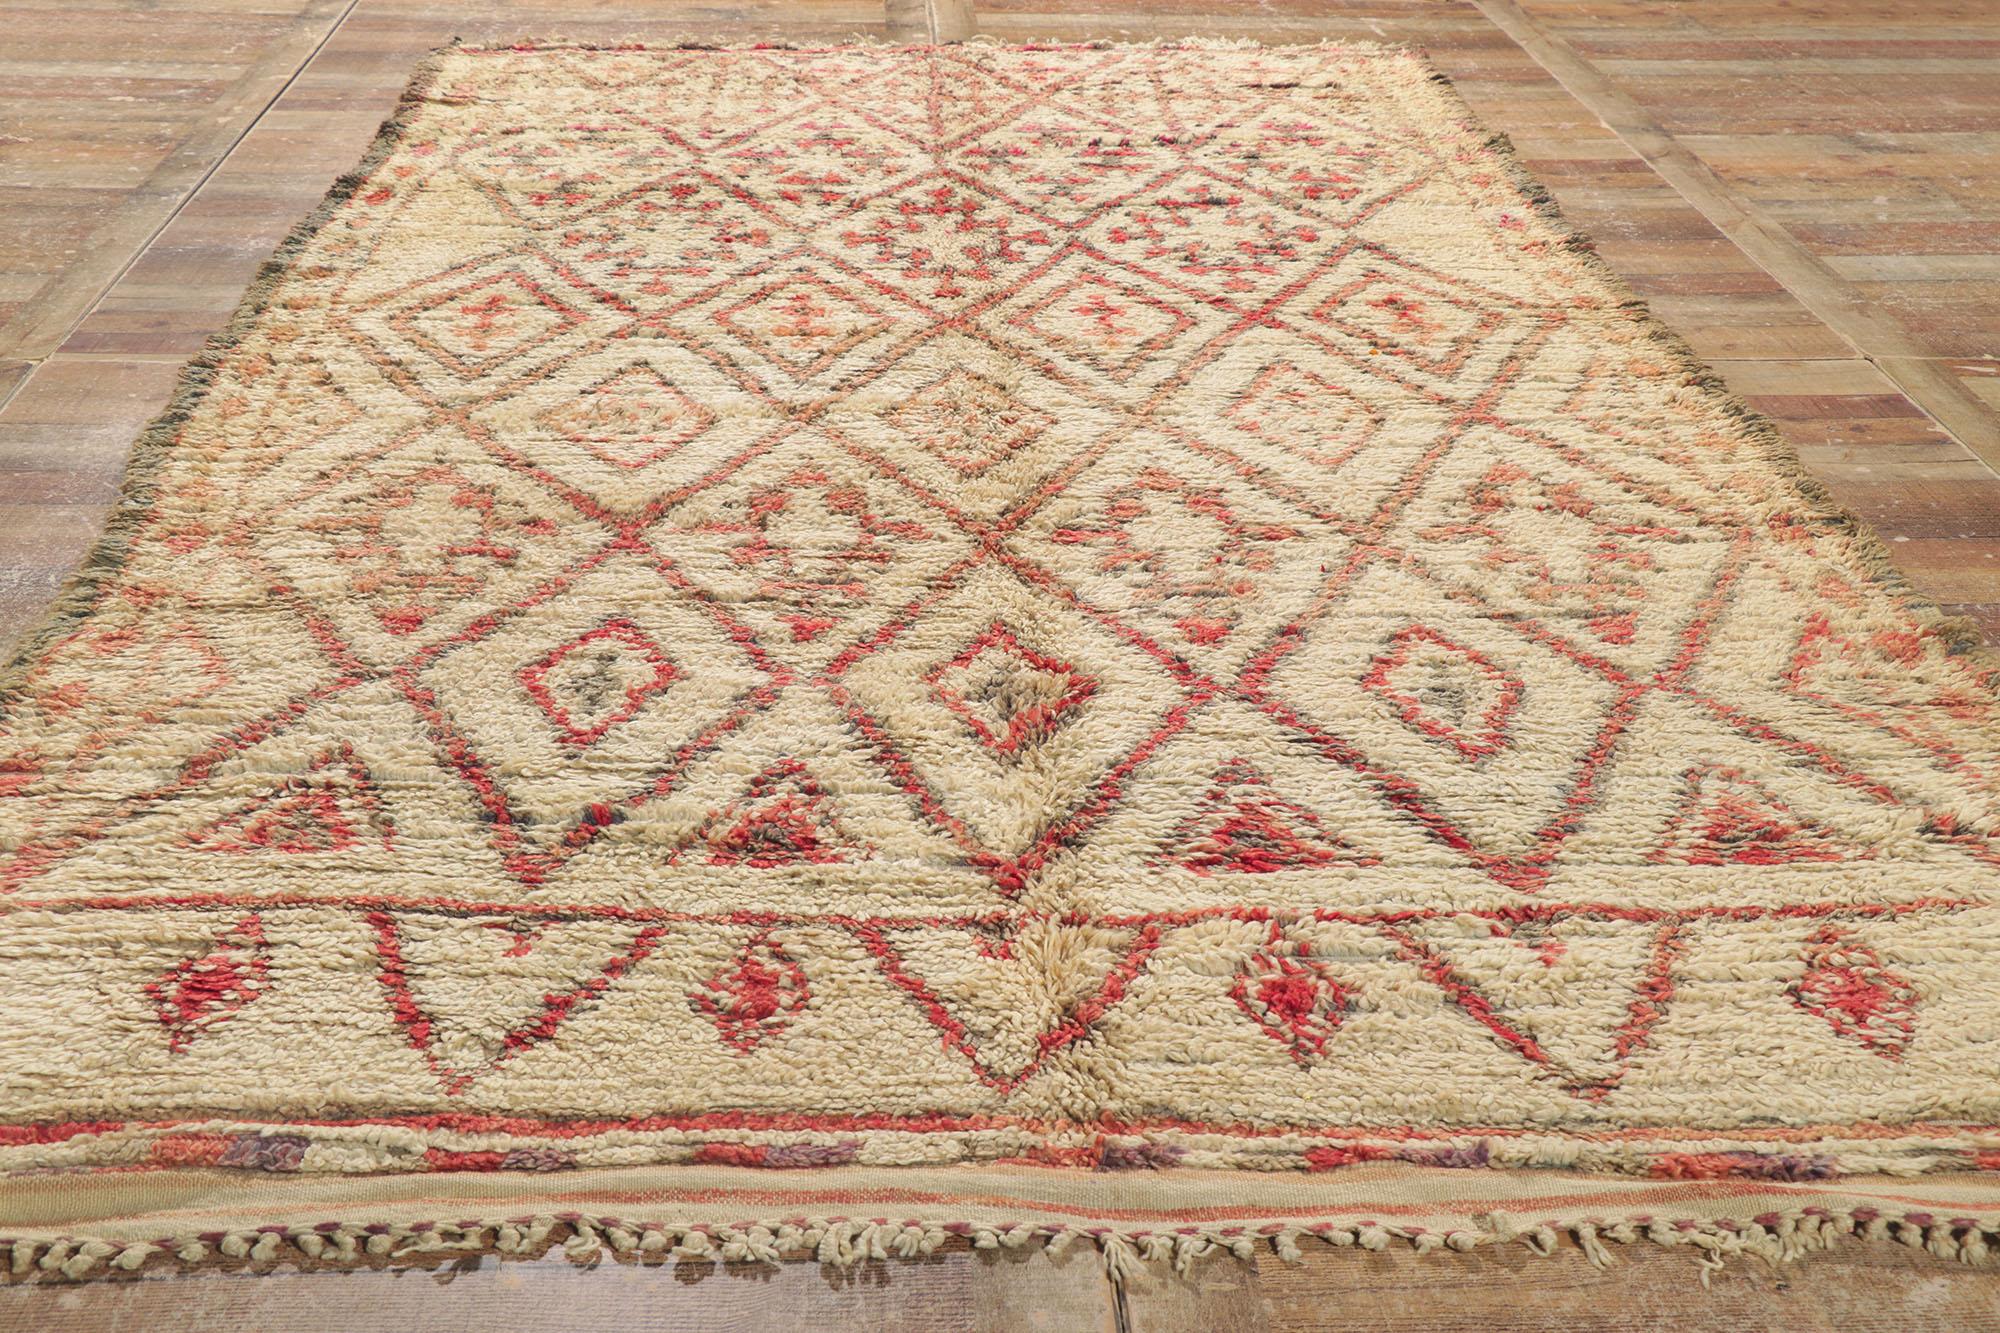 Vintage Moroccan Beni Ourain Rug, Midcentury Modern Meets Nomadic Charm For Sale 1